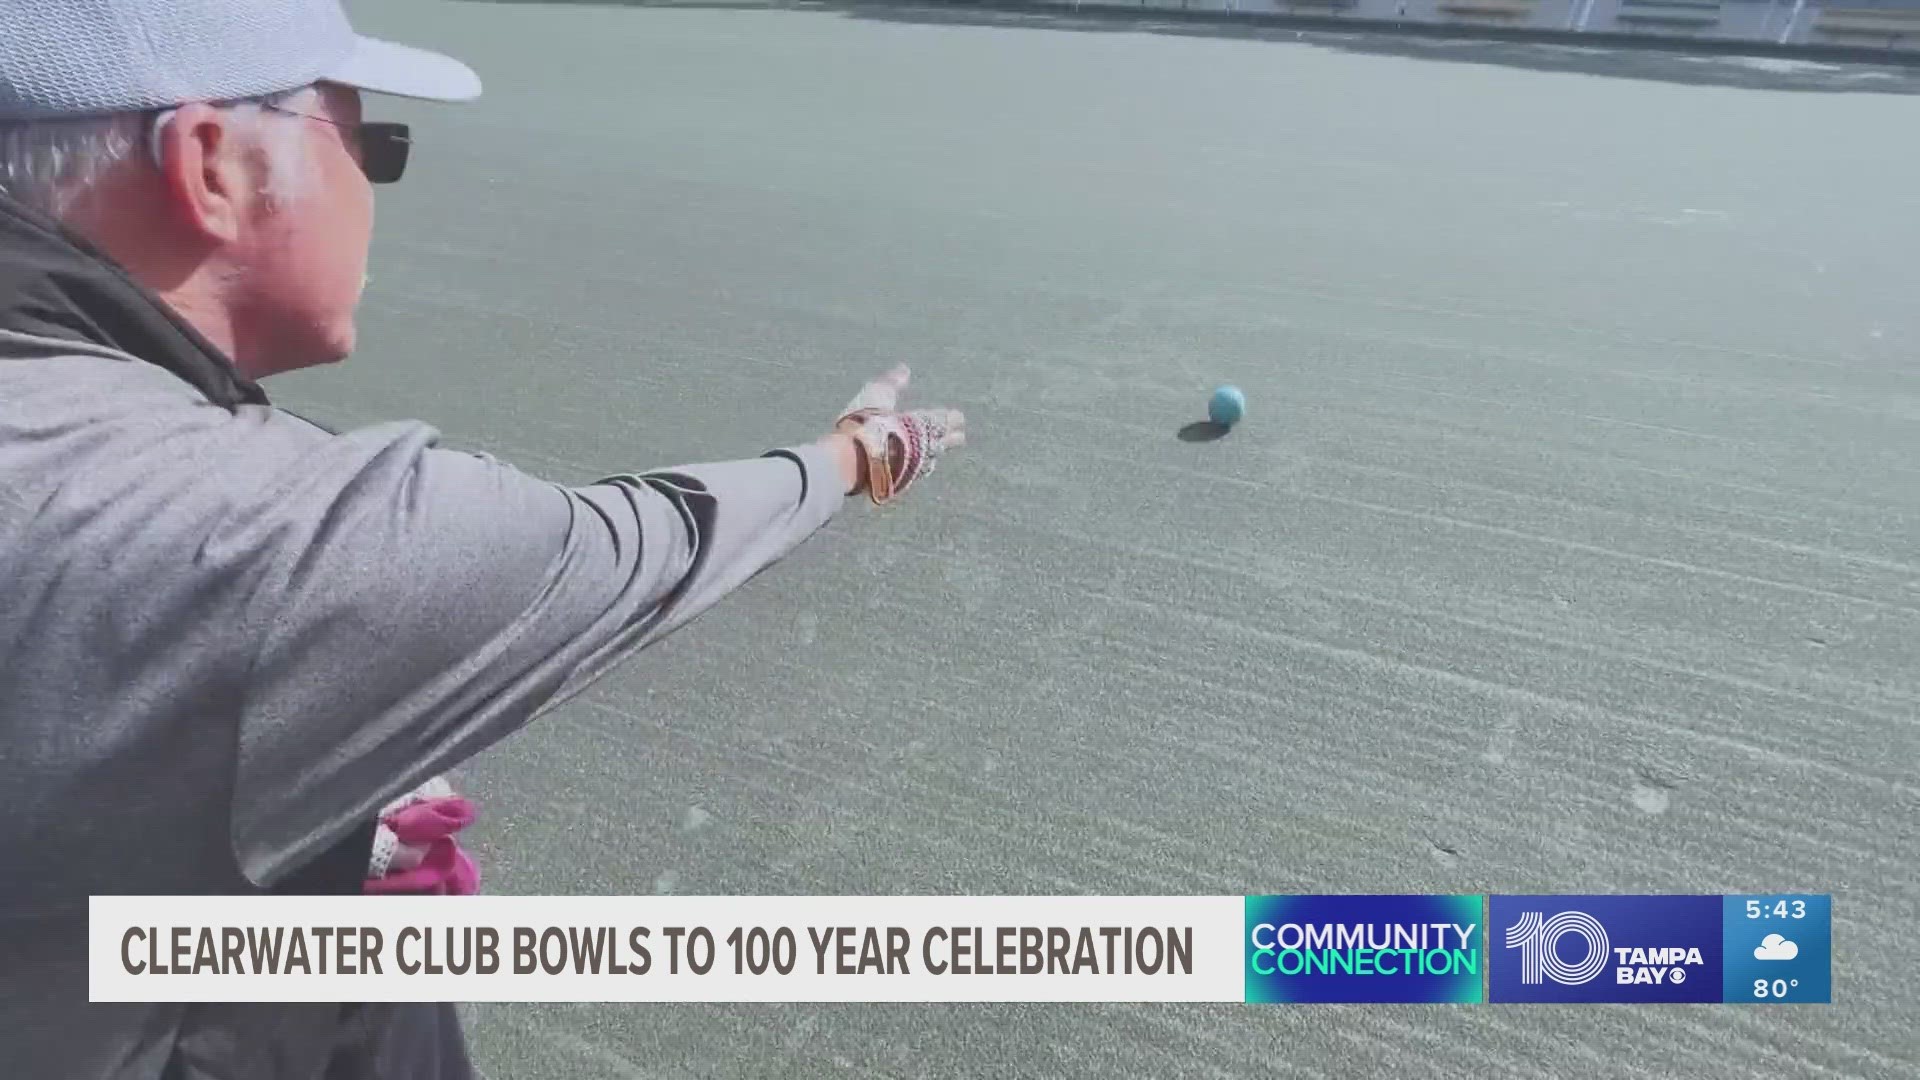 The Clearwater Lawn Bowls Club is celebrating its 100th year with a tournament. 10 Tampa Bay gets a look at how to play at one of the only clubs in the U.S.